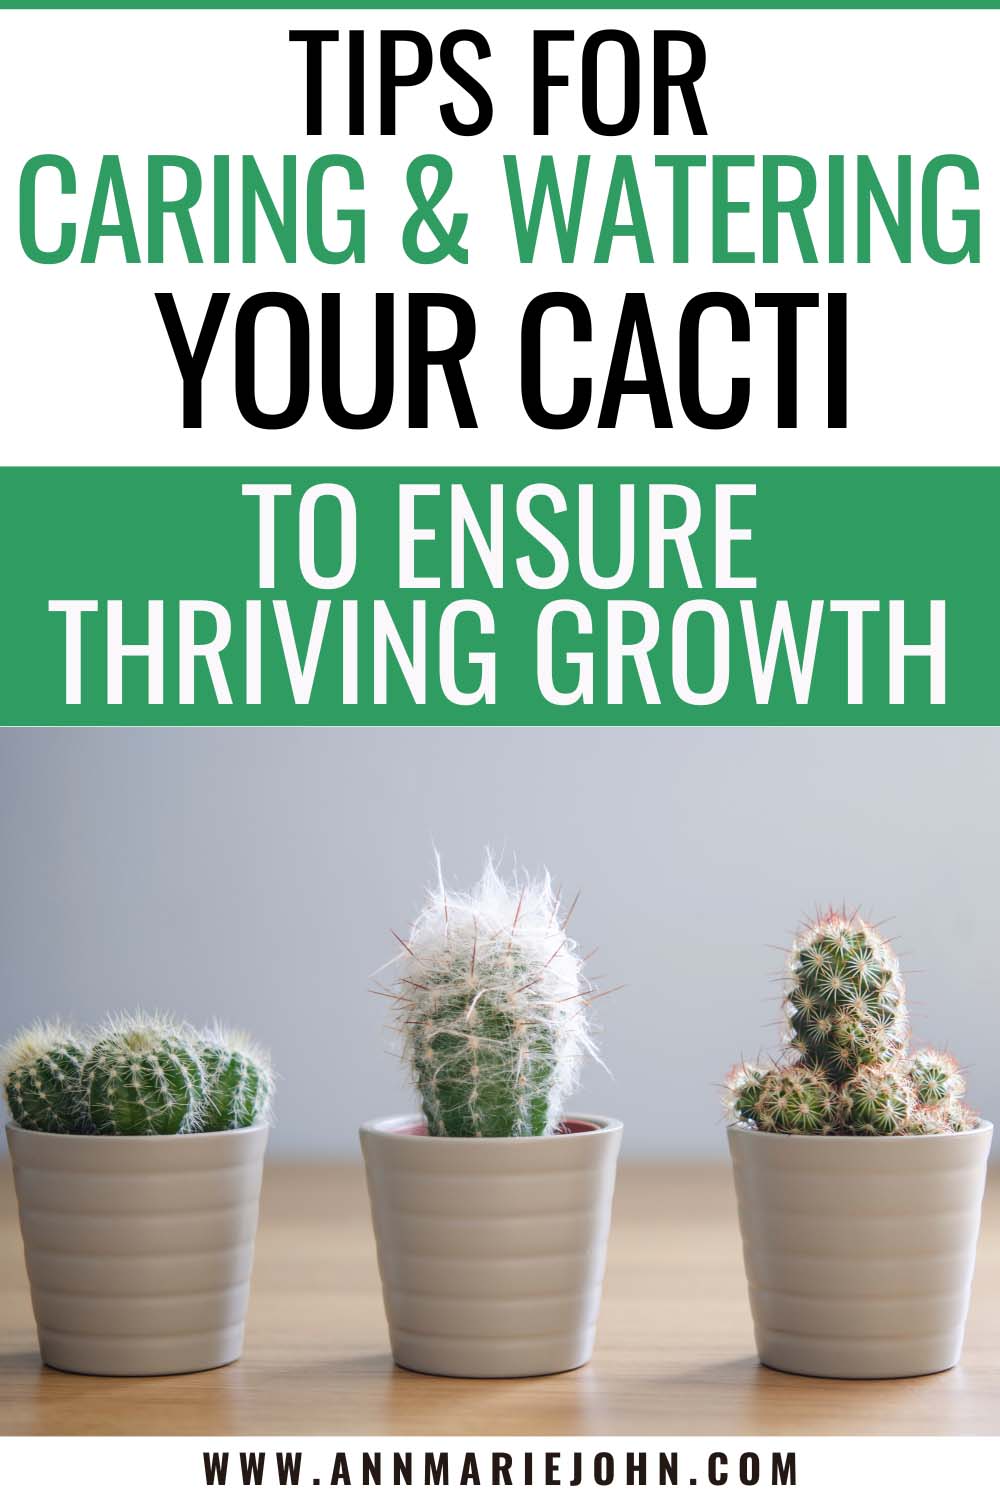 Tips for Caring and Watering Your Cacti